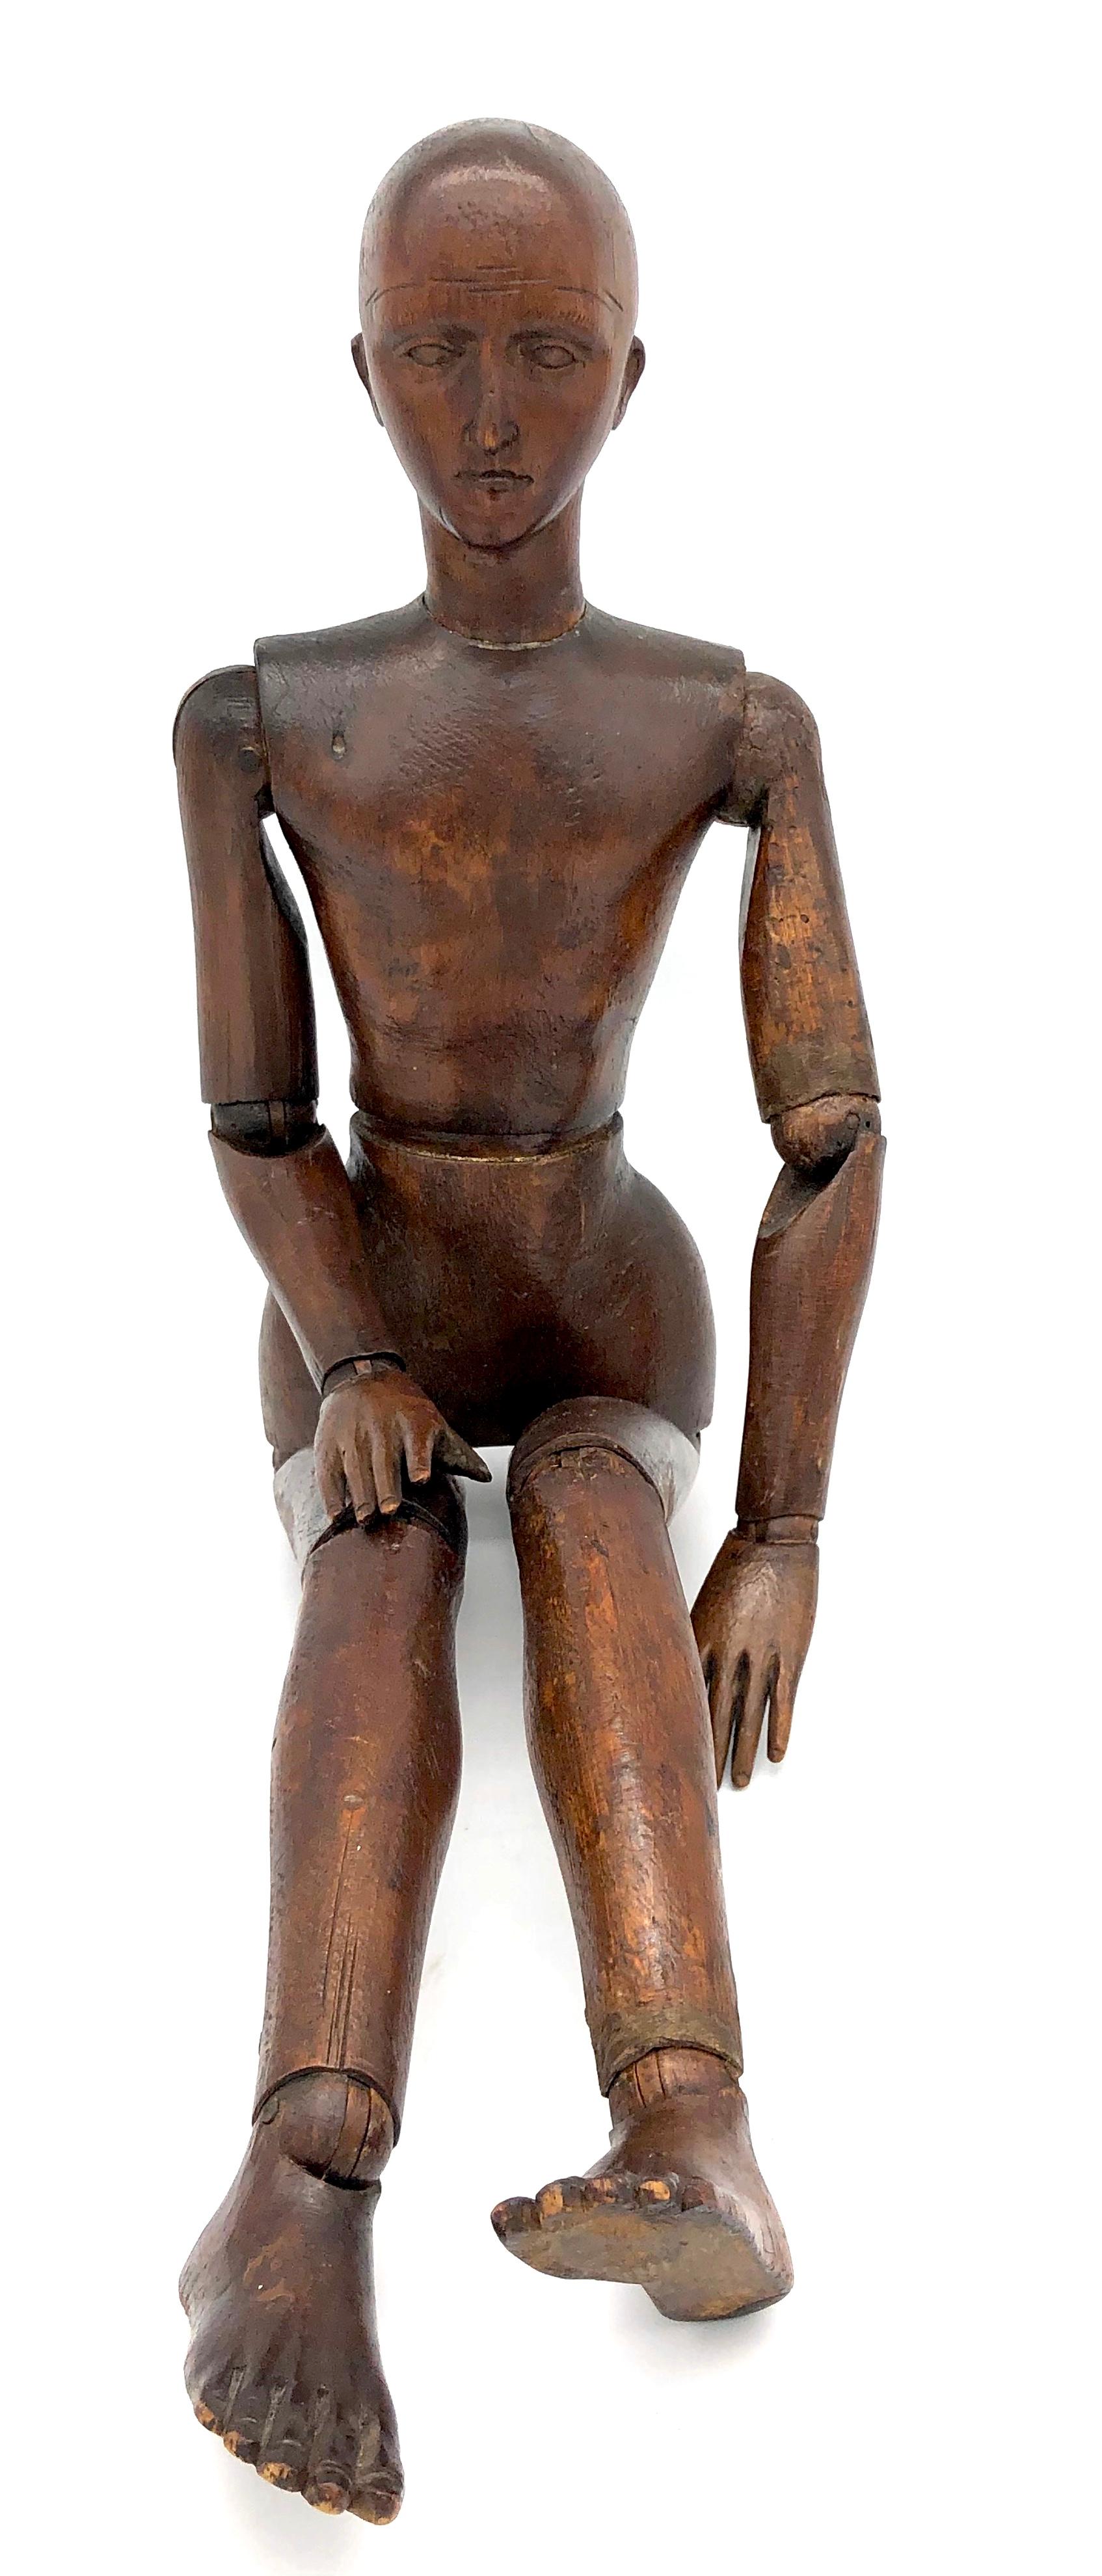 This rare early articulated mannequin is from an artist´s studio in Paris. It is made out of beechwood, patinated as mahogany. This highly unusual sculpture is exquisitely carved.
It was made in circa 1820.